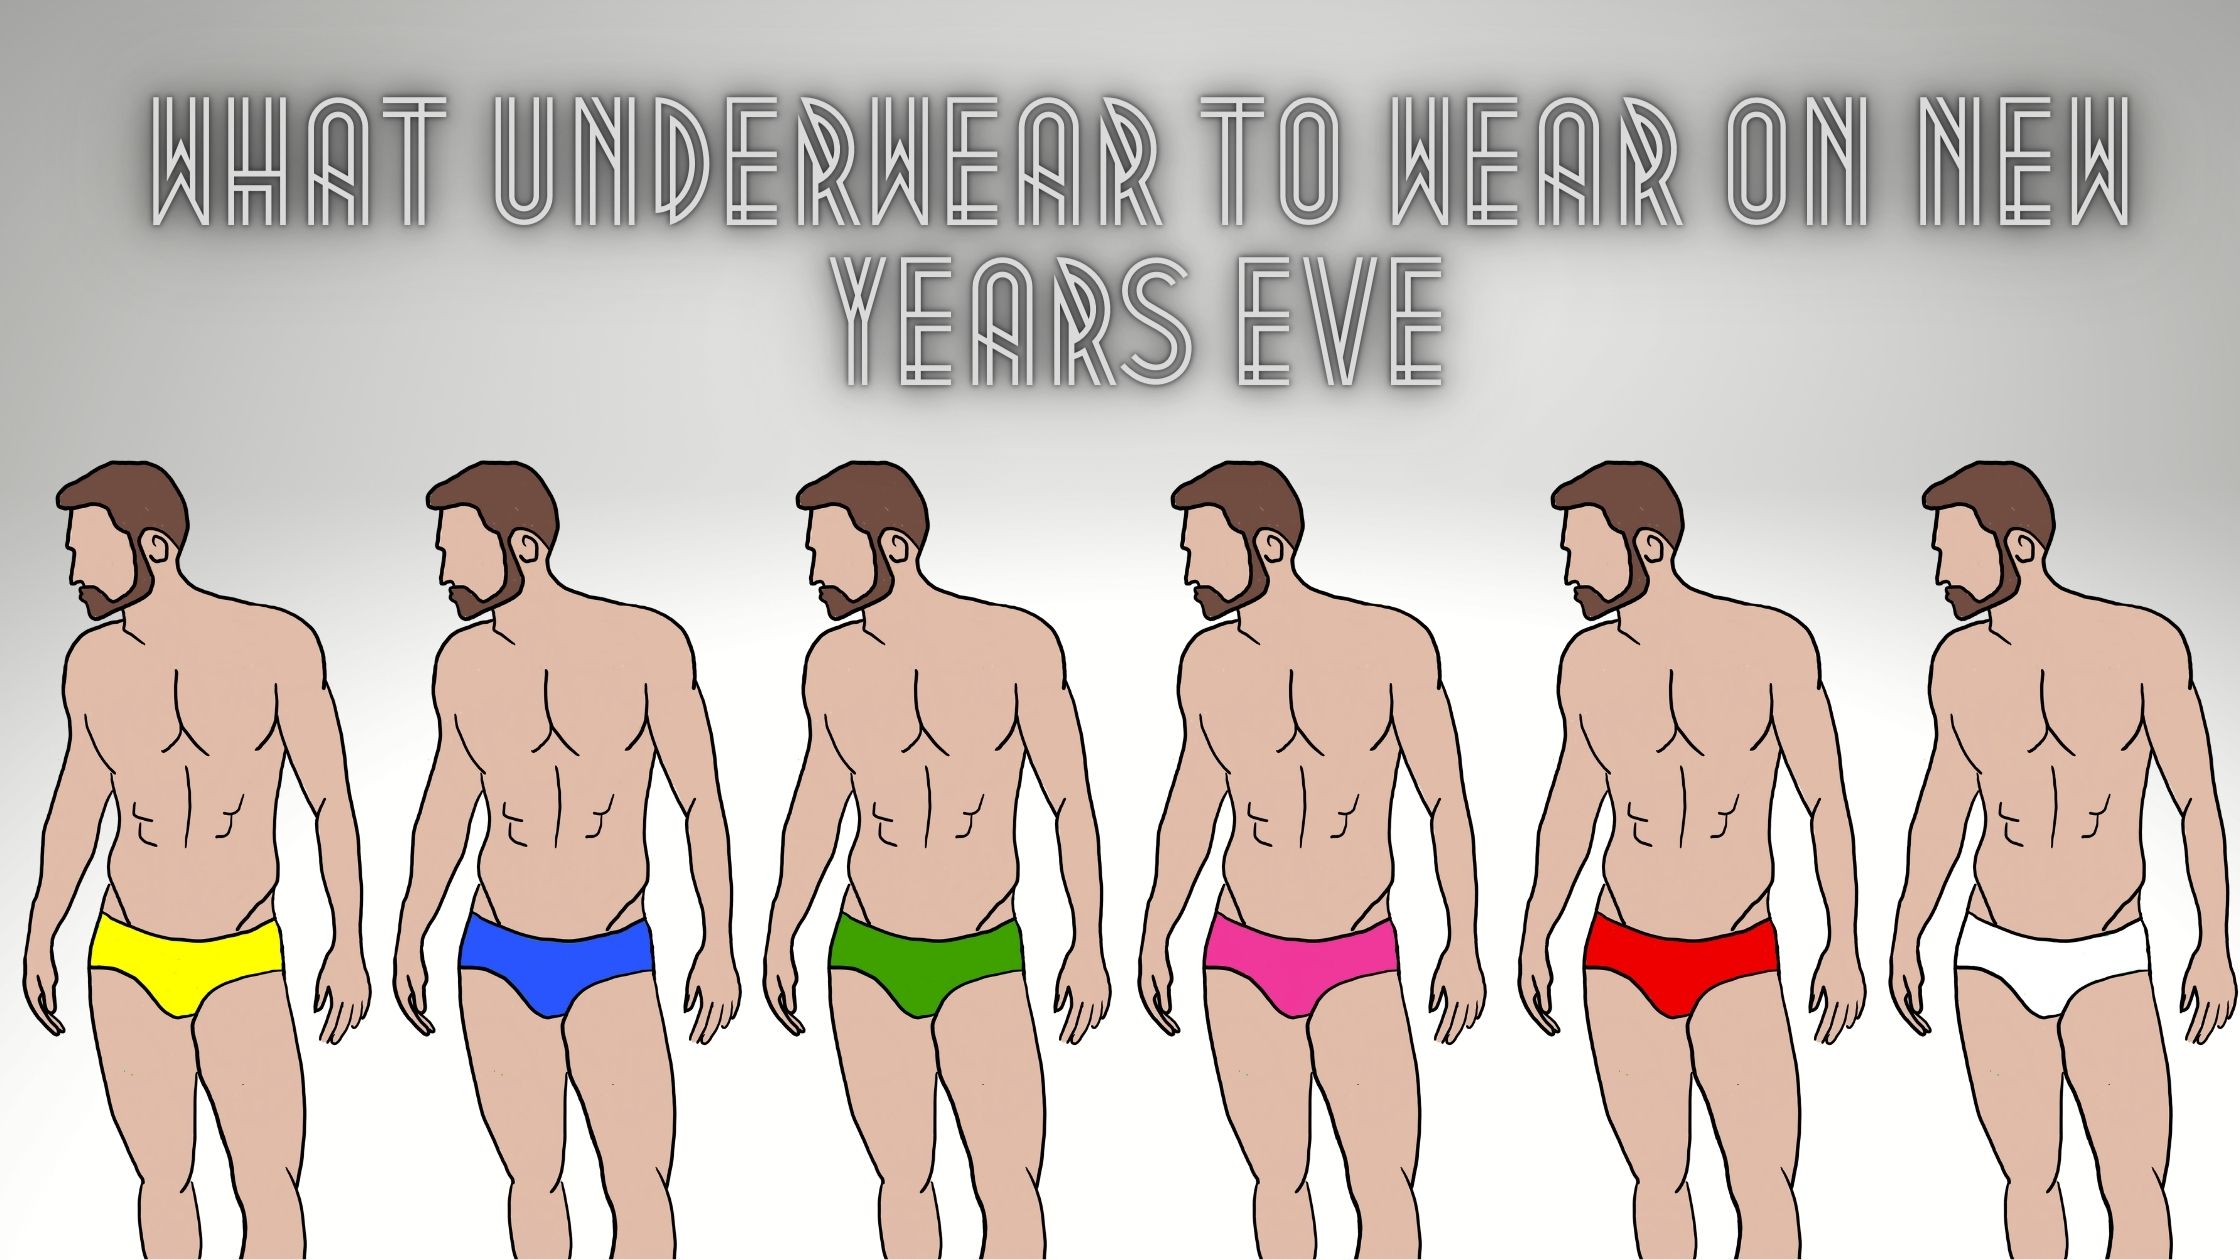 What color underwear should you wear on New Years Eve? Underwear News